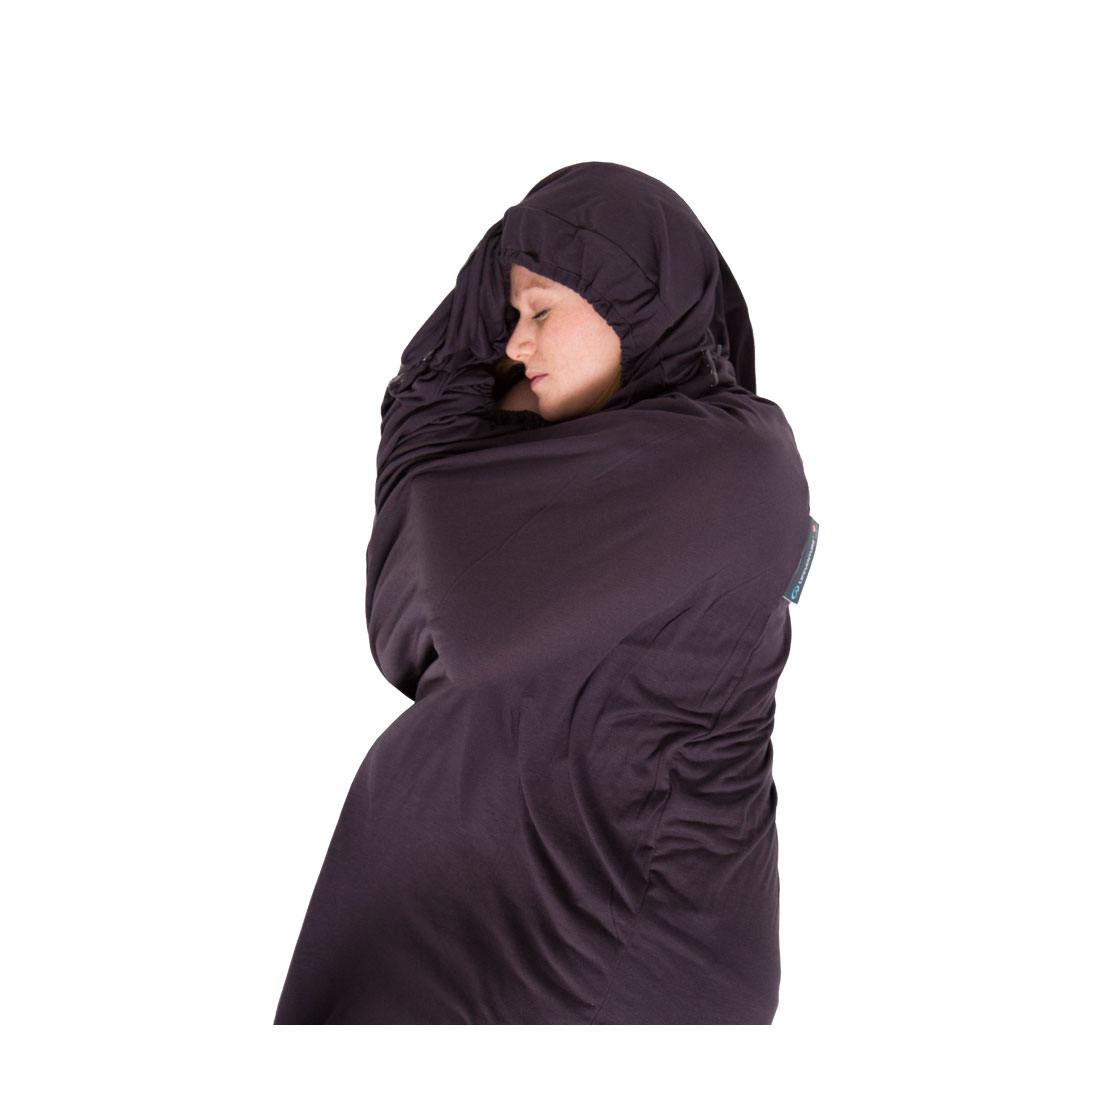 Hood is one of the added features  of some sleeping bag liners